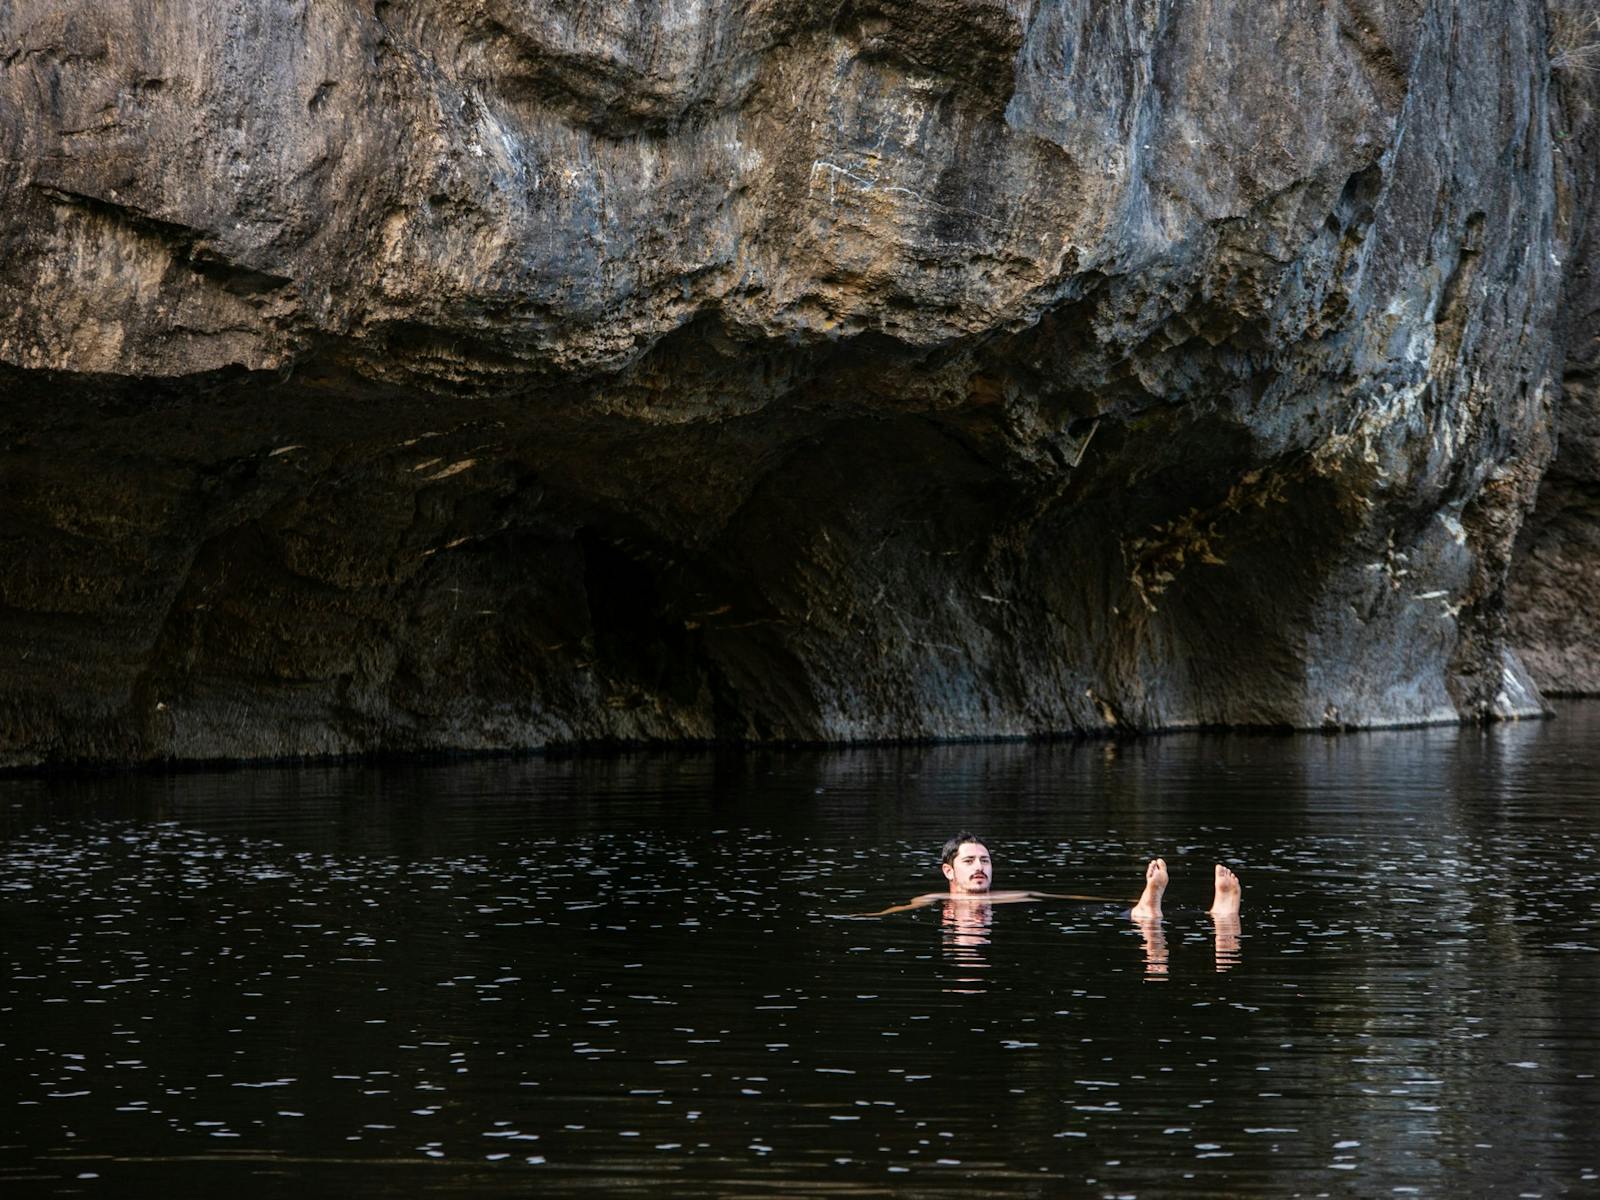 Swimming in a river on a guided packrafting tour in Tasmania